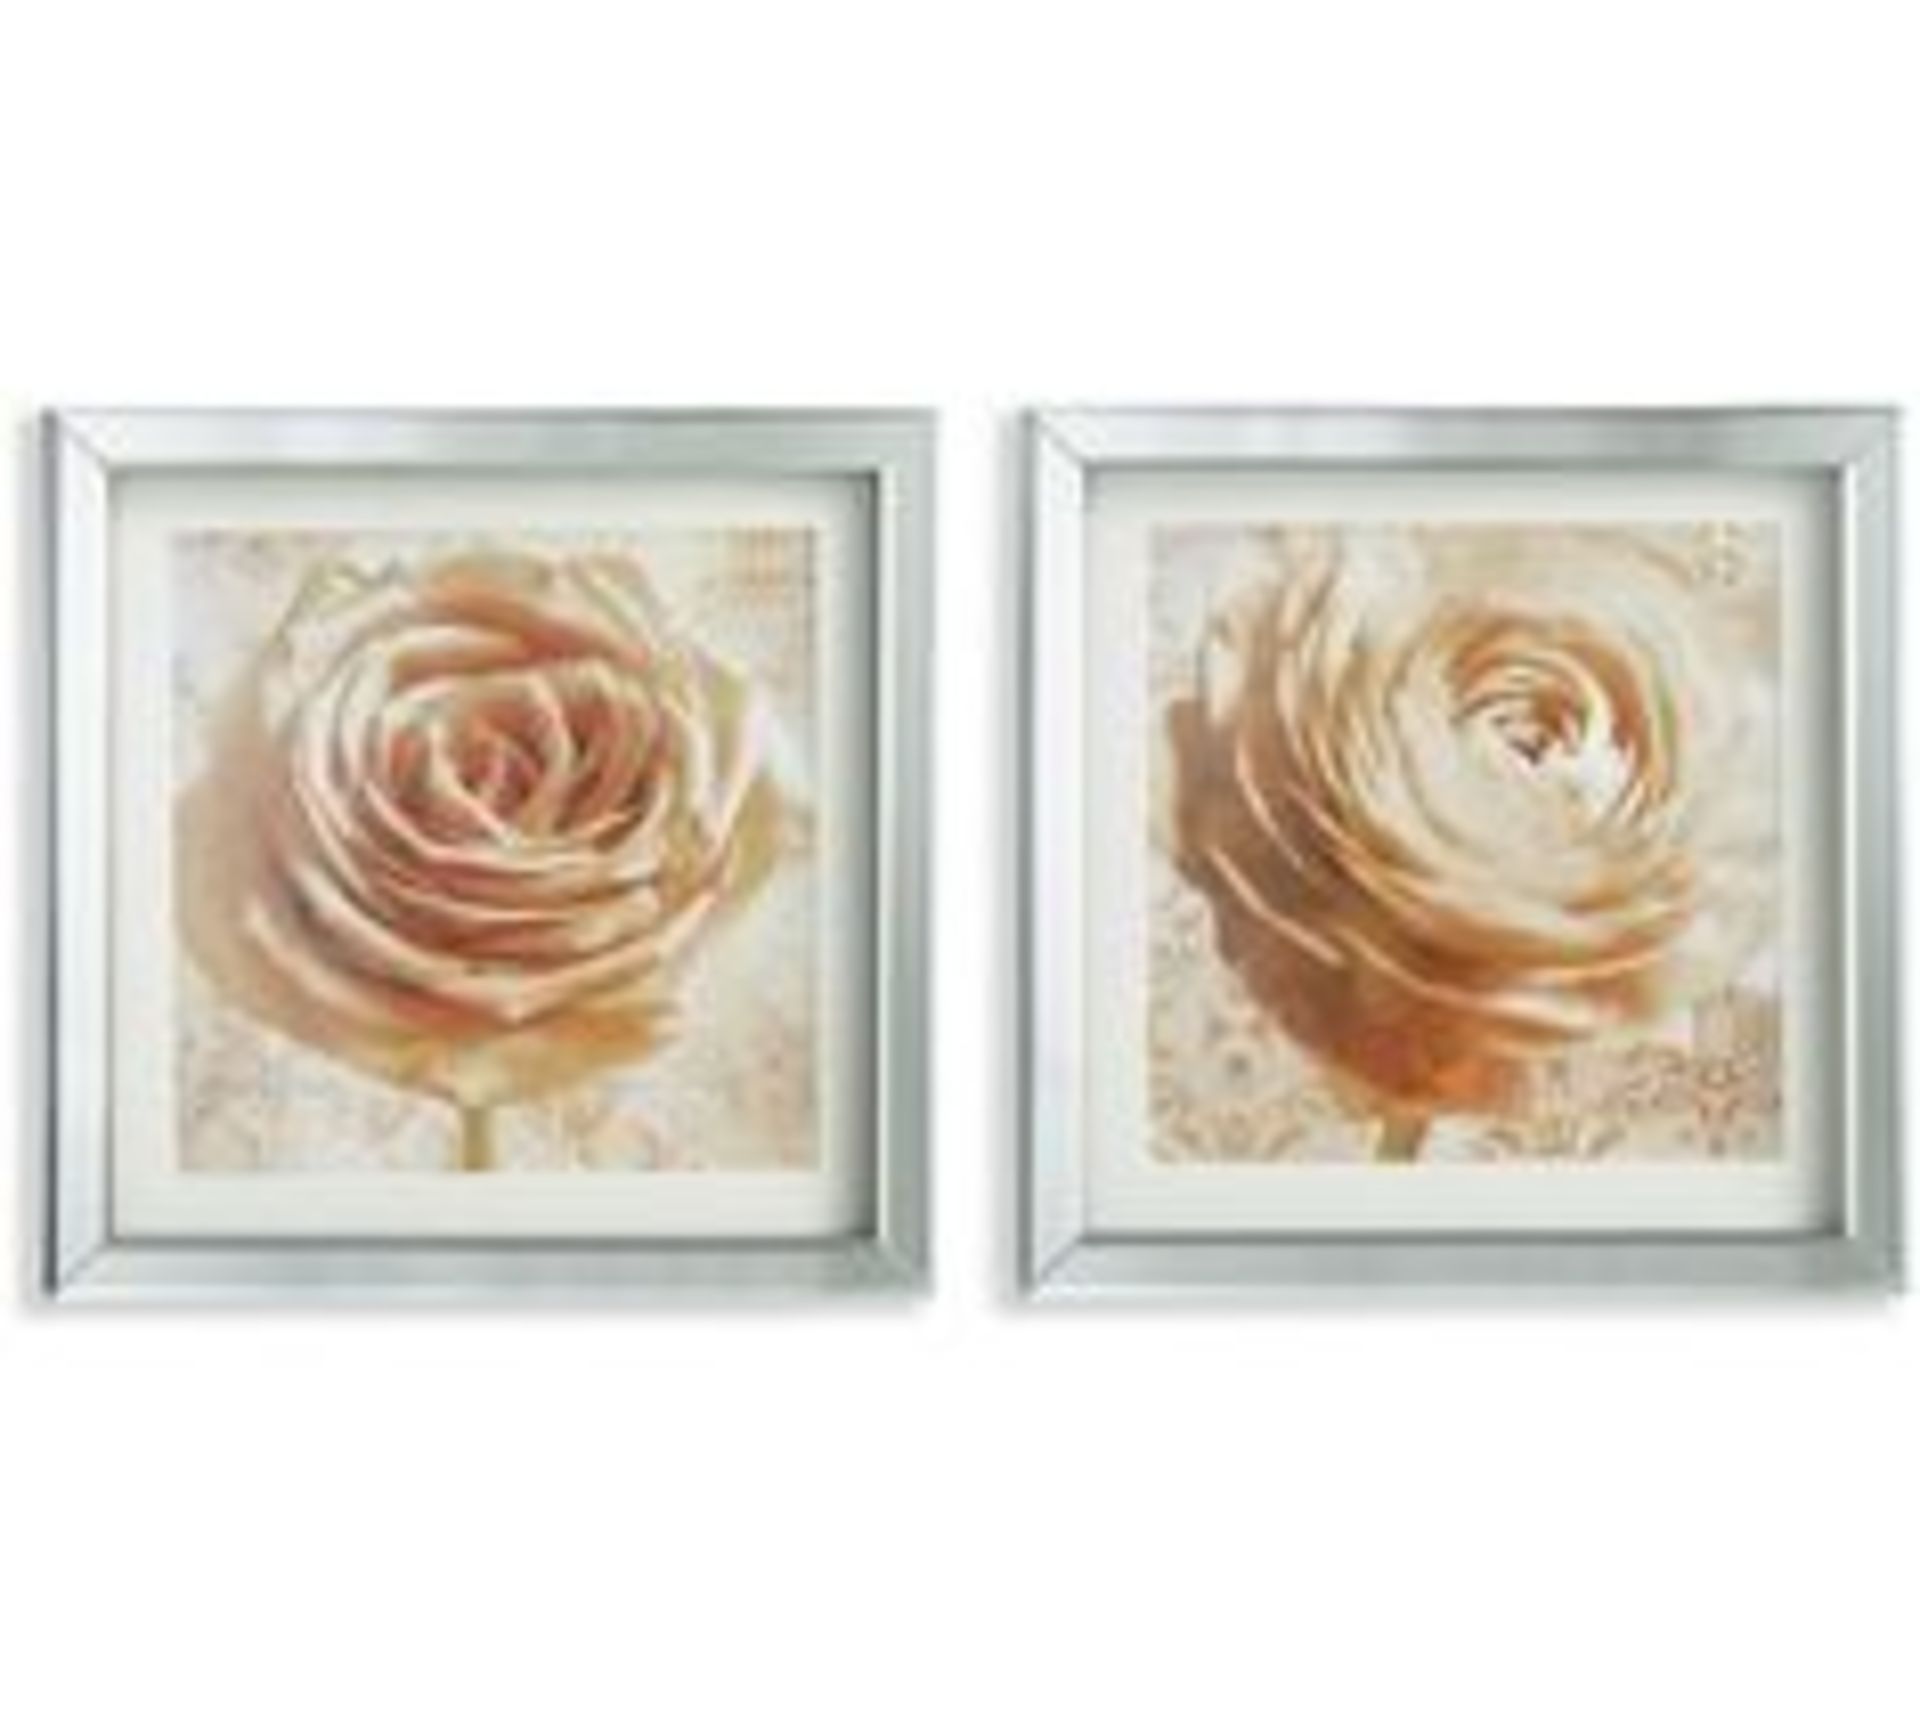 1 BRAND NEW BOXED ARTHOUSE SEPIA ROSES SET OF 2 MIRRORED FRAMED CANVAS 60CMX30CM